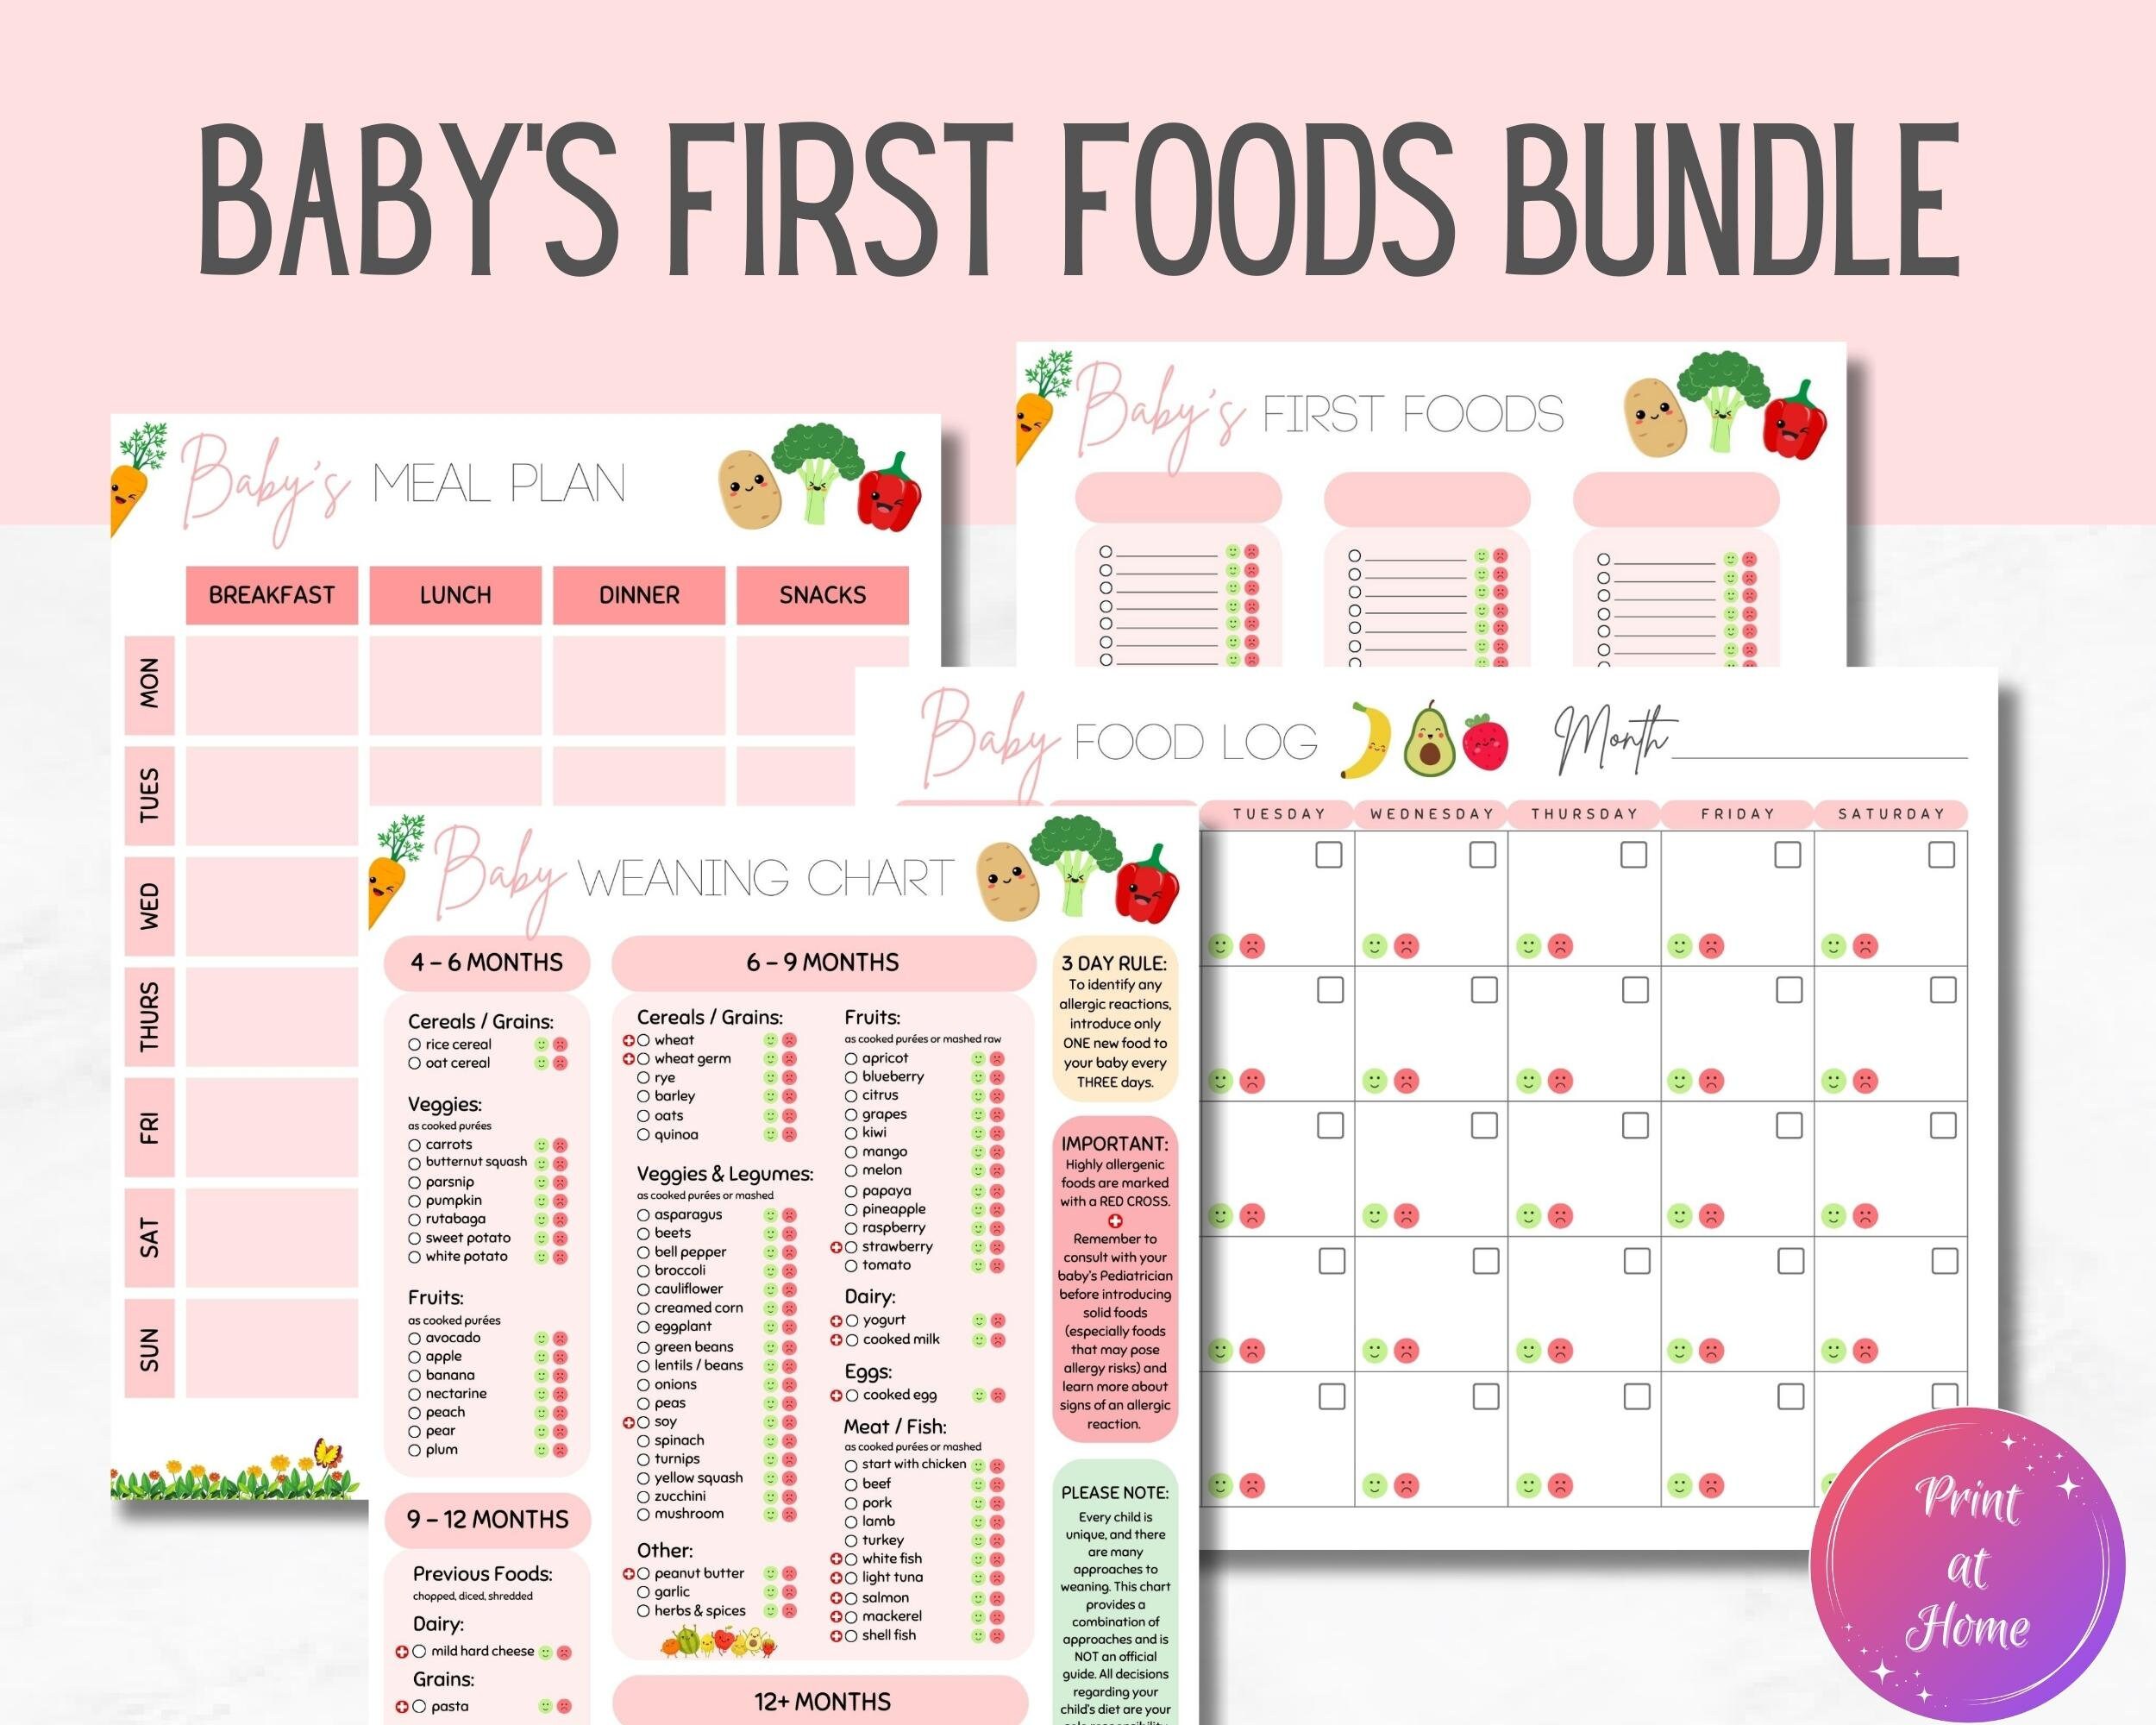 Vegan Baby Led Weaning 101 Before One Checklist · Vegan Baby Led Weaning  Food Tracker - PDF Download